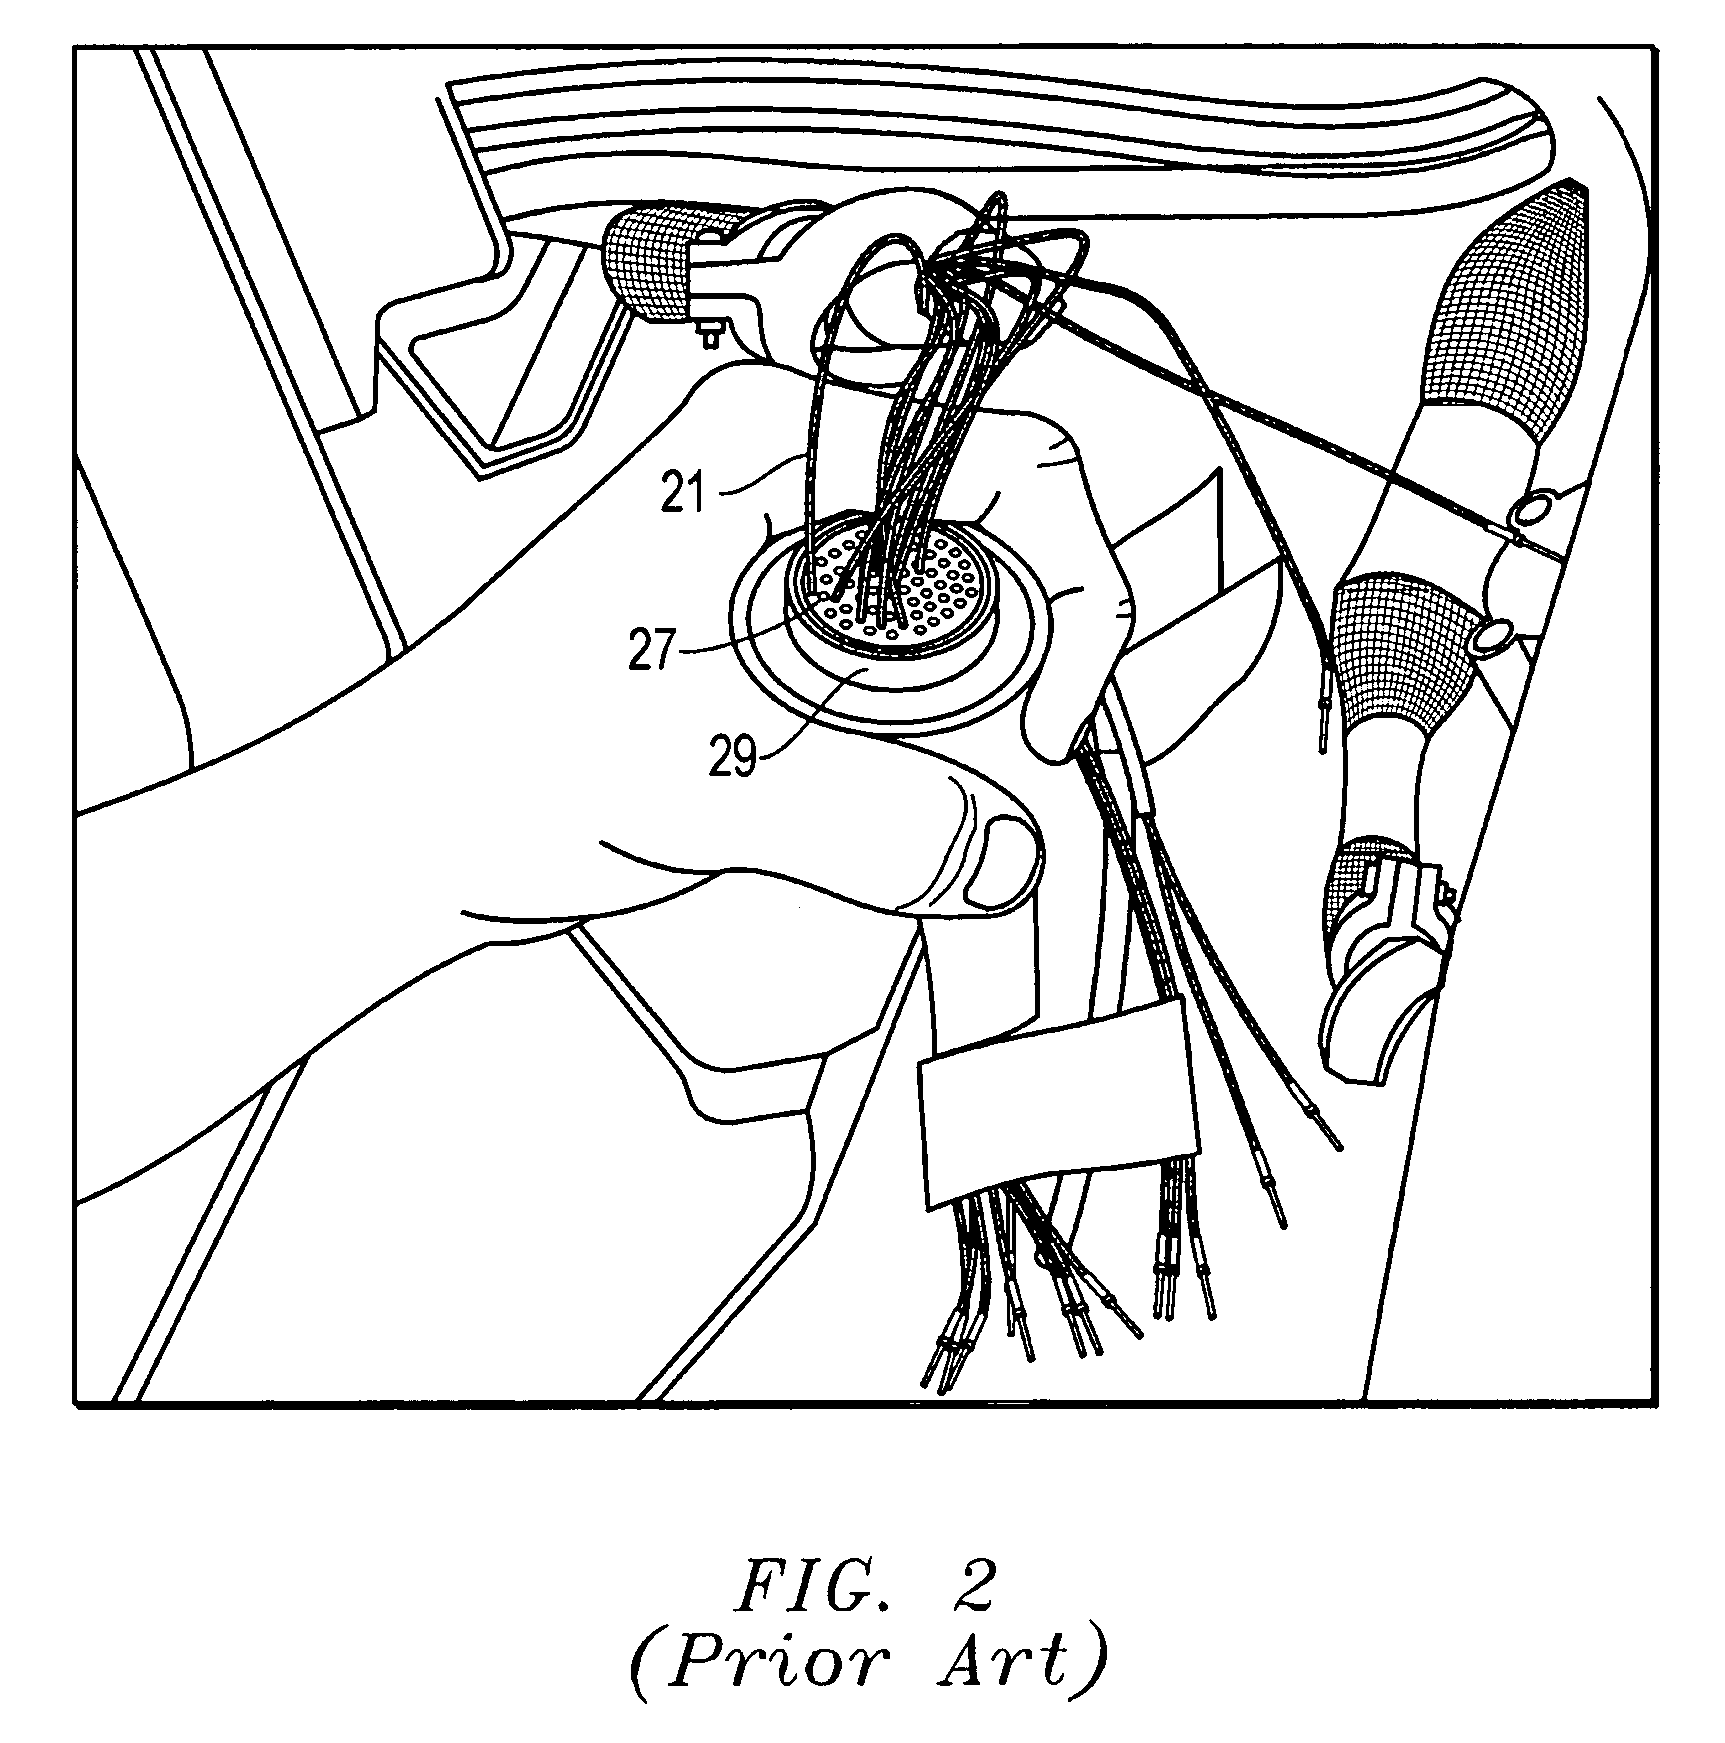 Method of matching harnesses of conductors with apertures in connectors